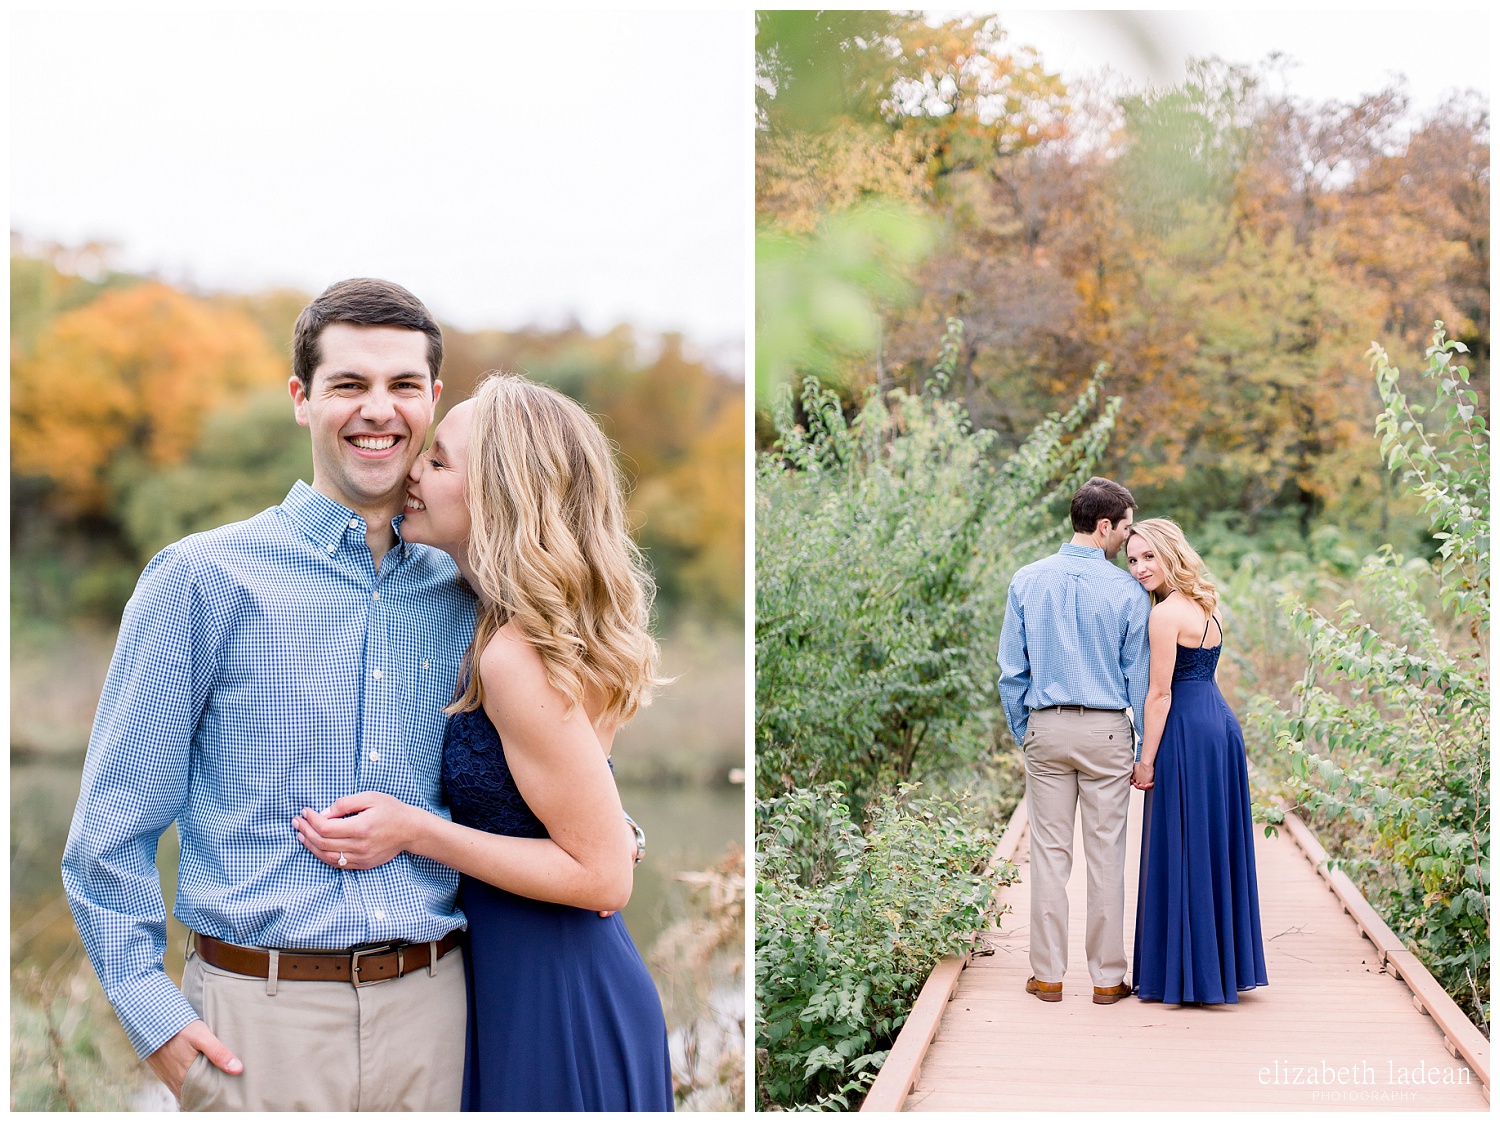 Colorful-Fall-Engagement-Photos-in-KC-C+B-2018-elizabeth-ladean-photography-photo_1799.jpg